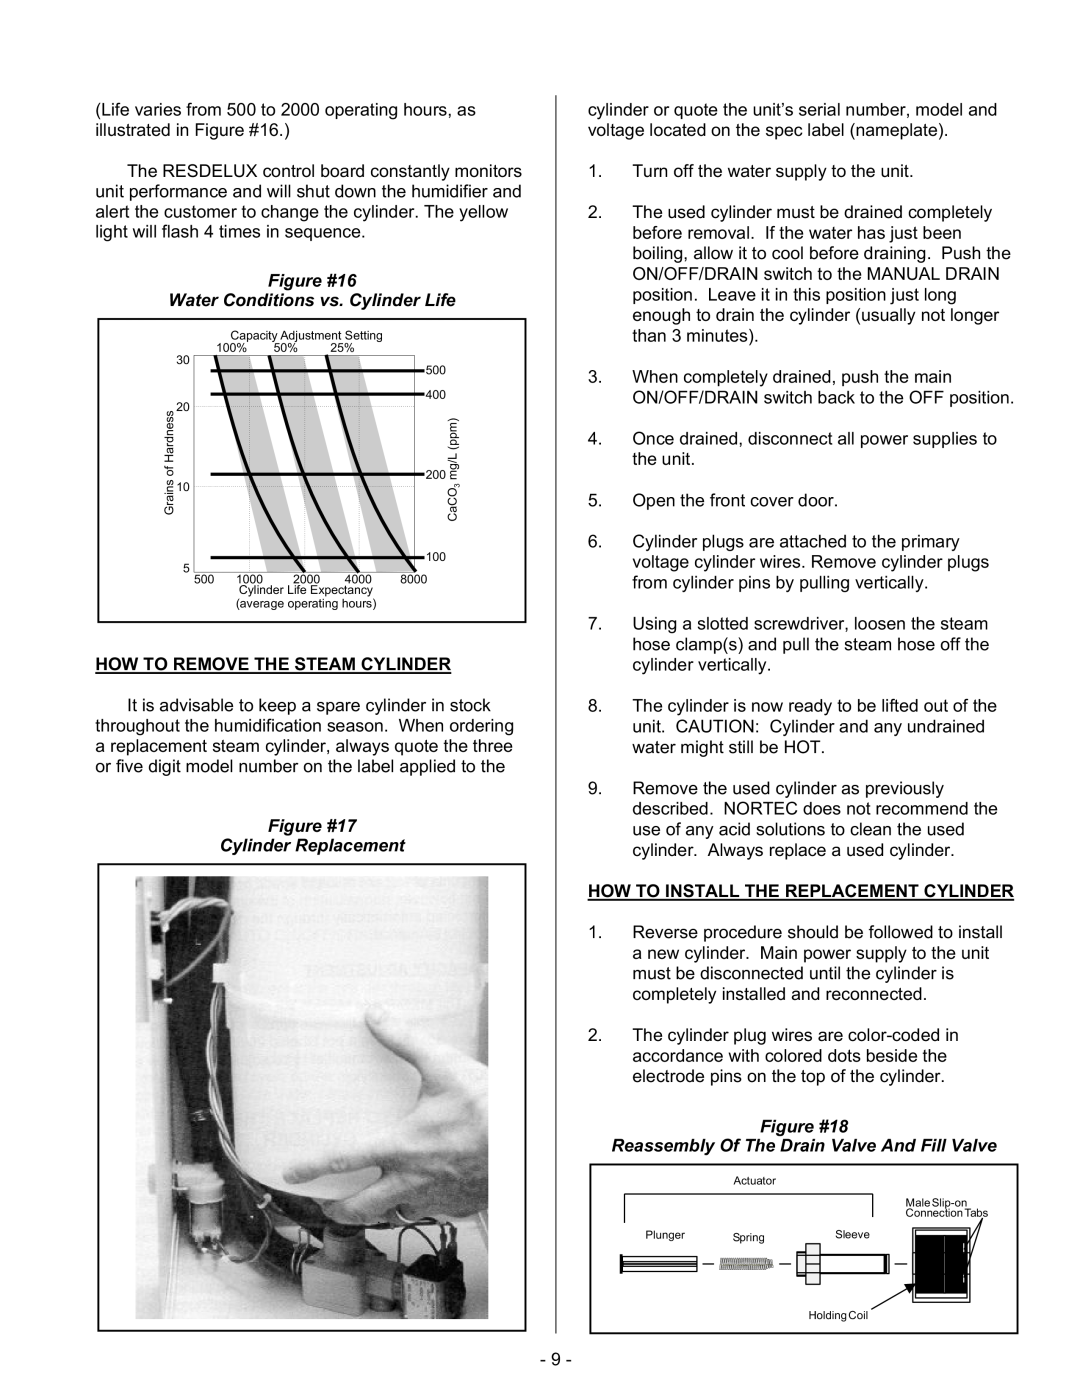 Nortec Steam Humidifiers manual Figure #16 Water Conditions vs. Cylinder Life, How To Remove The Steam Cylinder, Figure #18 